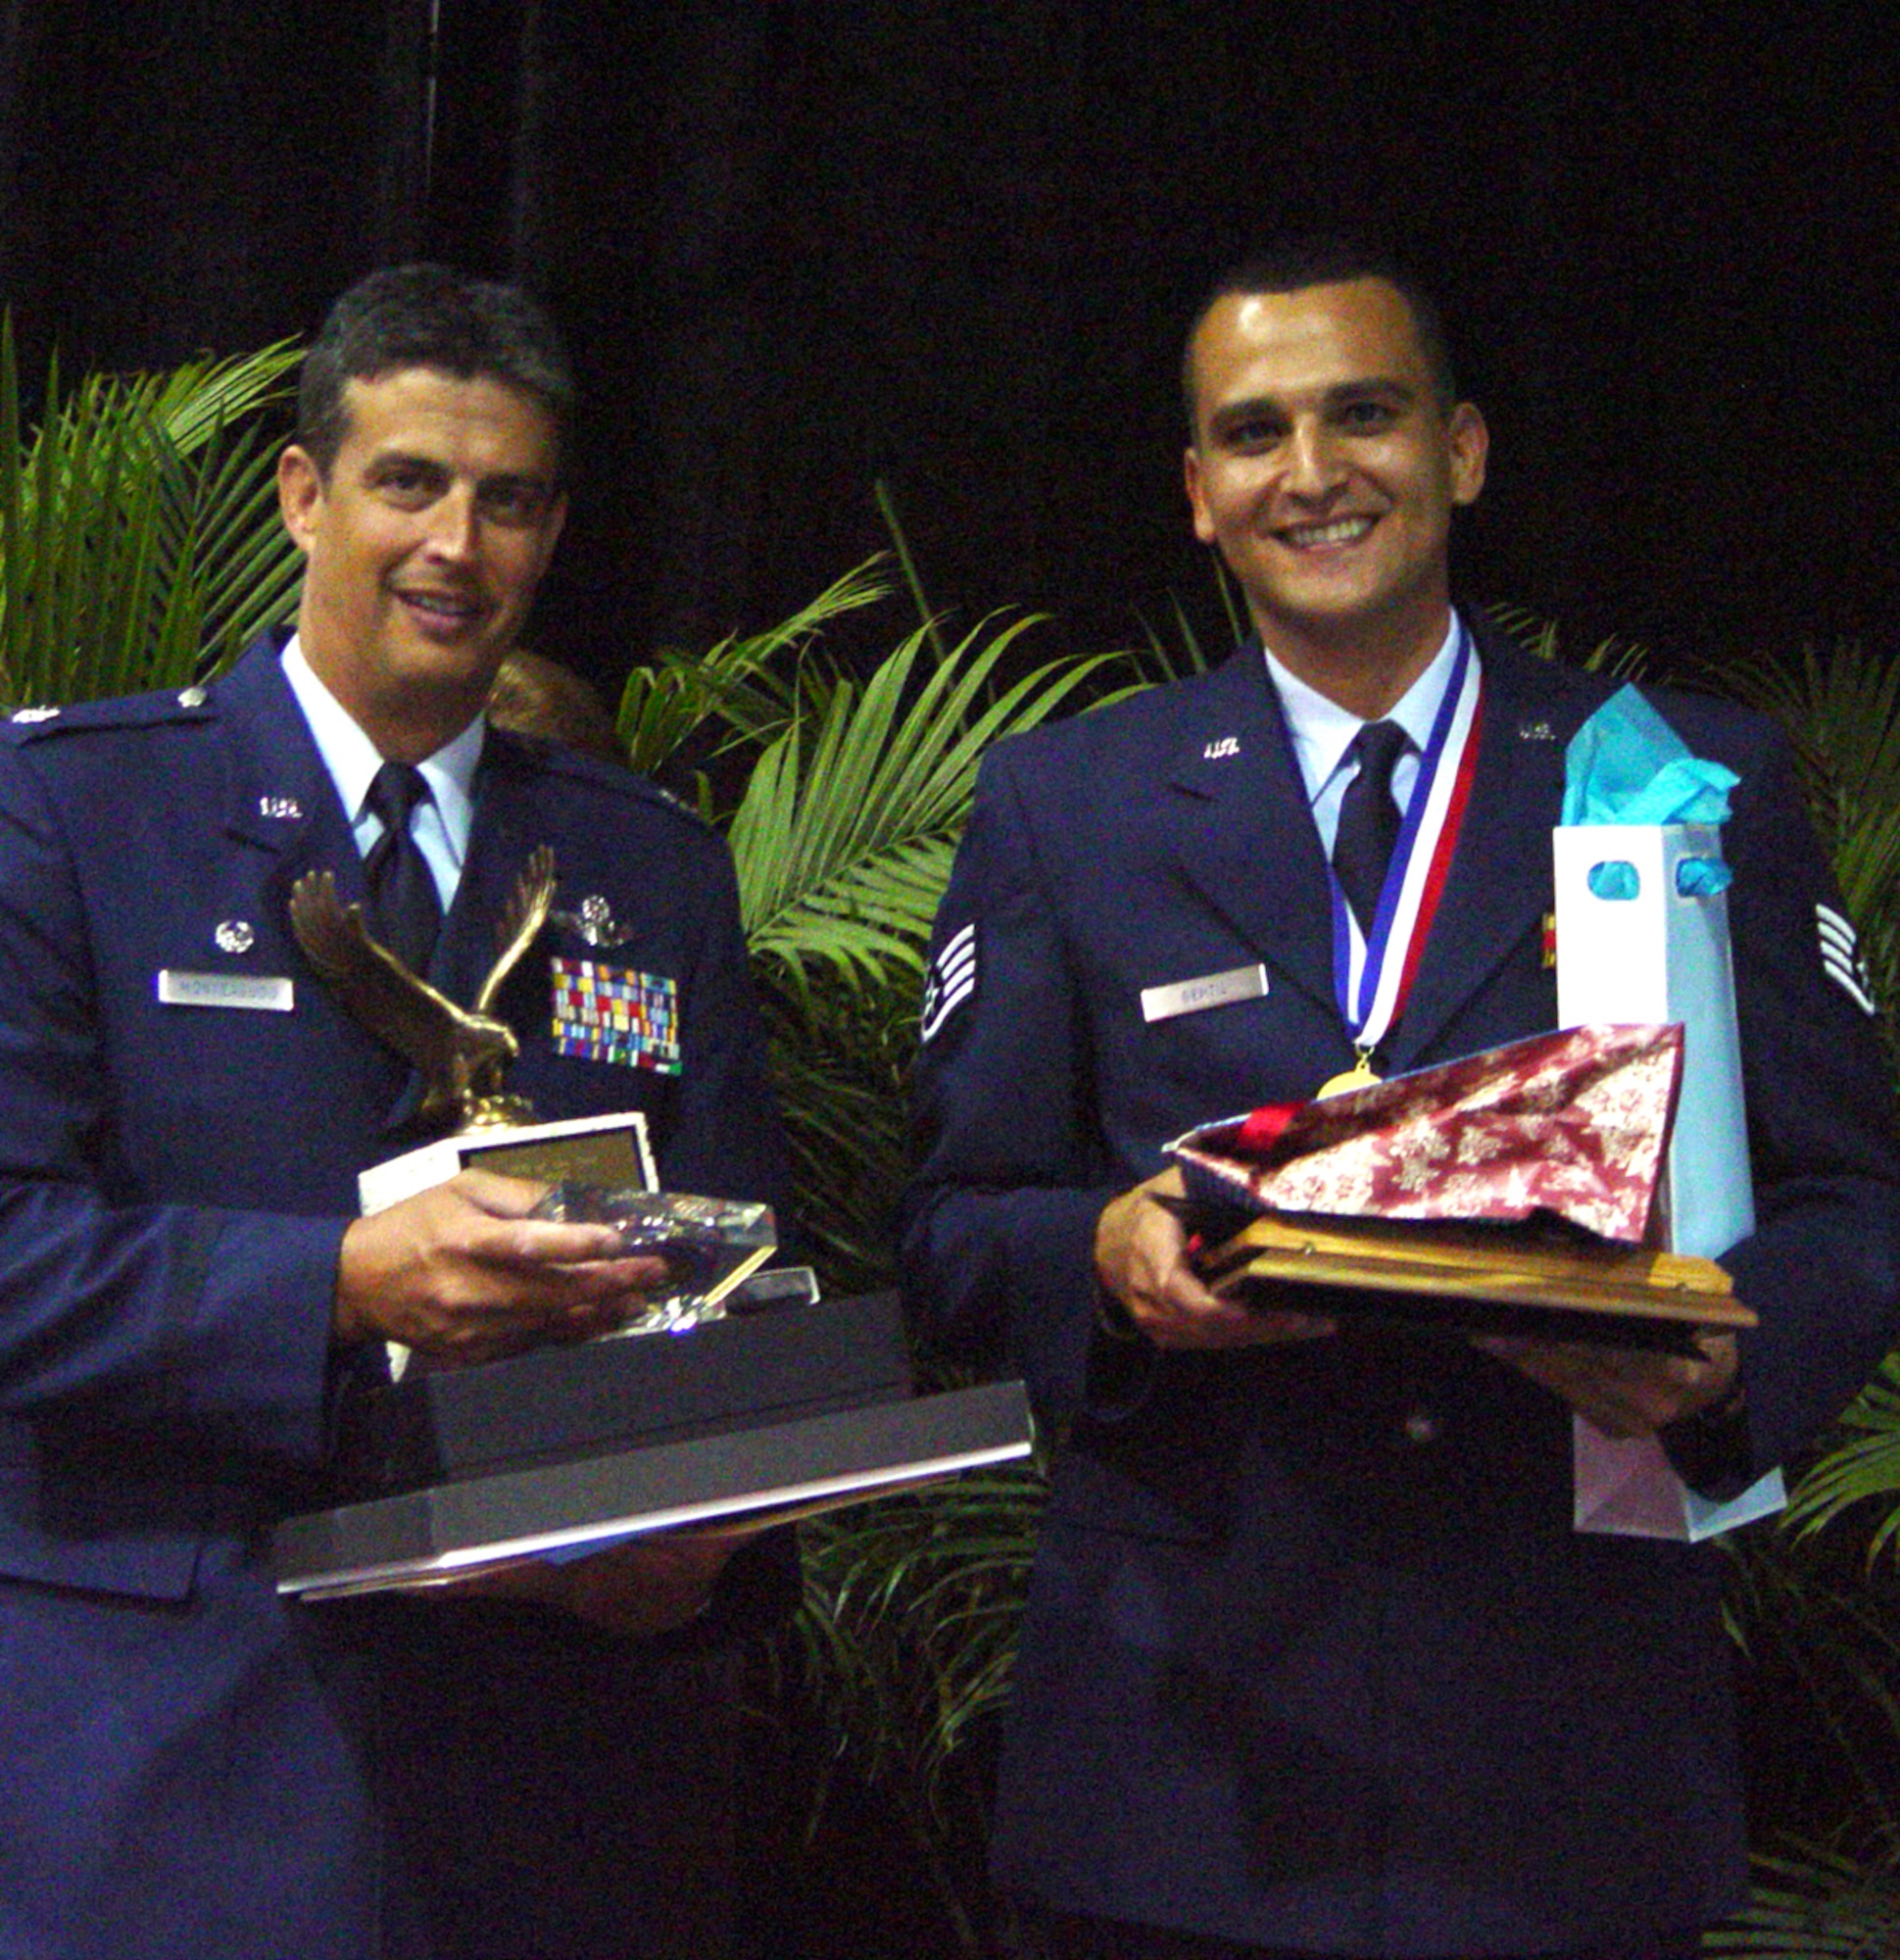 Staff Sgt Edouard Gentil, 482nd Fighter Wing NCO of the Year, enlisted the help of Lt. Col. Jose Monteagudo to carry all the awards he received during the banquet. (Air Force photo by Lisa Macias)           